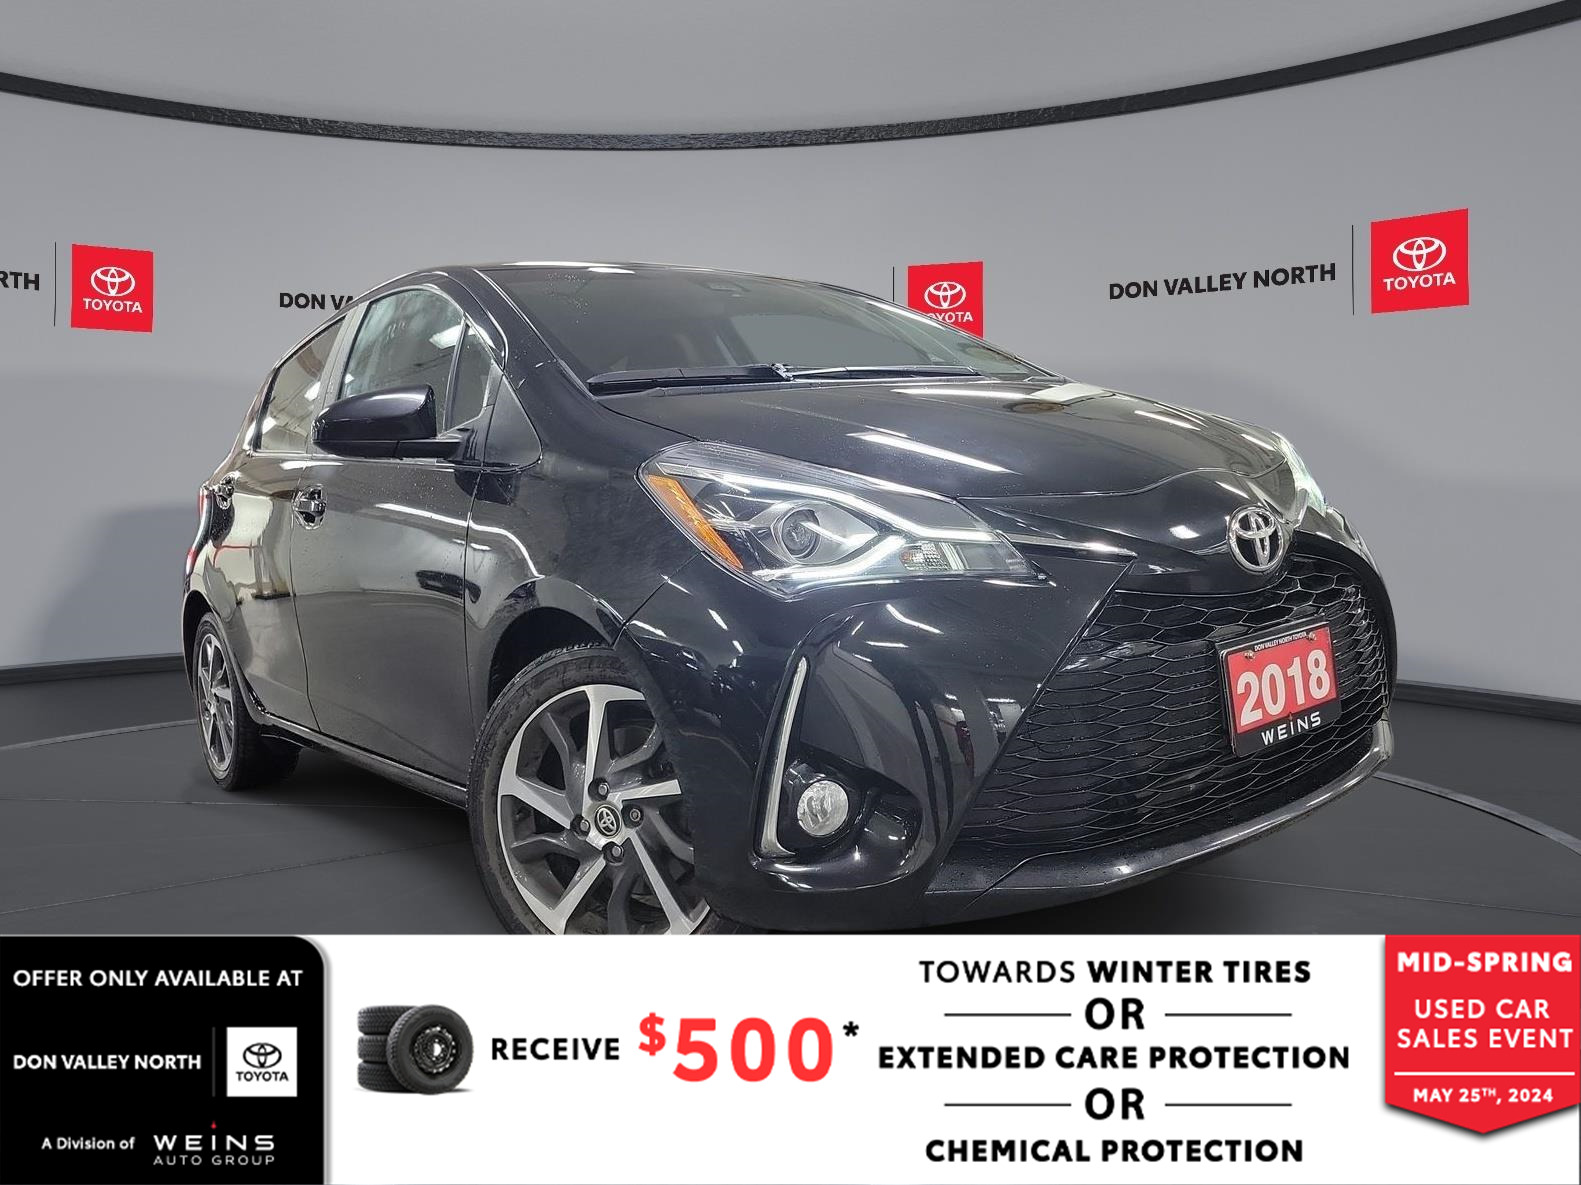 2018 Toyota Yaris SE INCOMING | LOW COST | BRAKE ASSIST | CRUISE CON